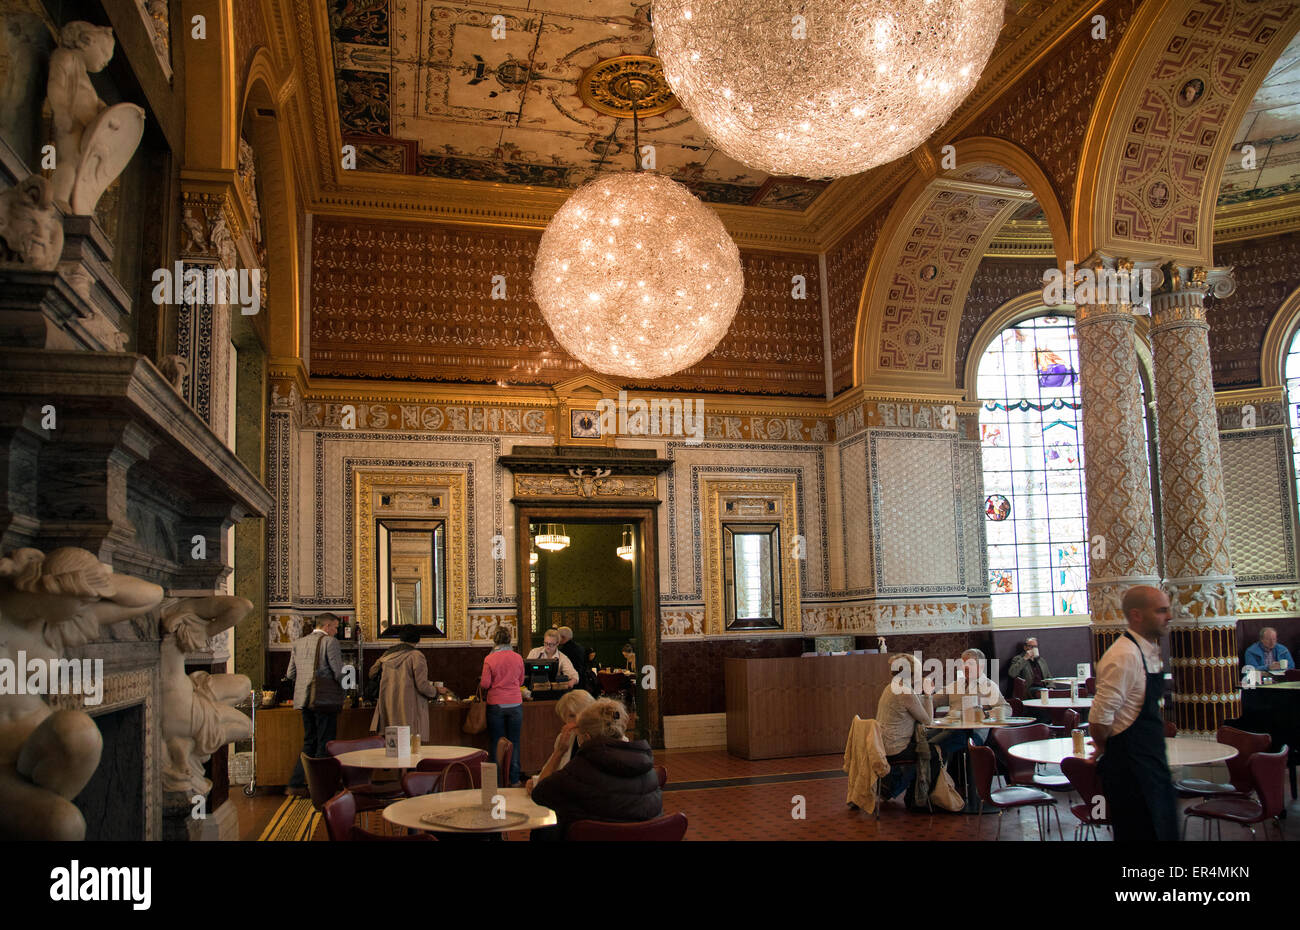 Elegant cafe in the Victoria and Albert museum, South Kensington